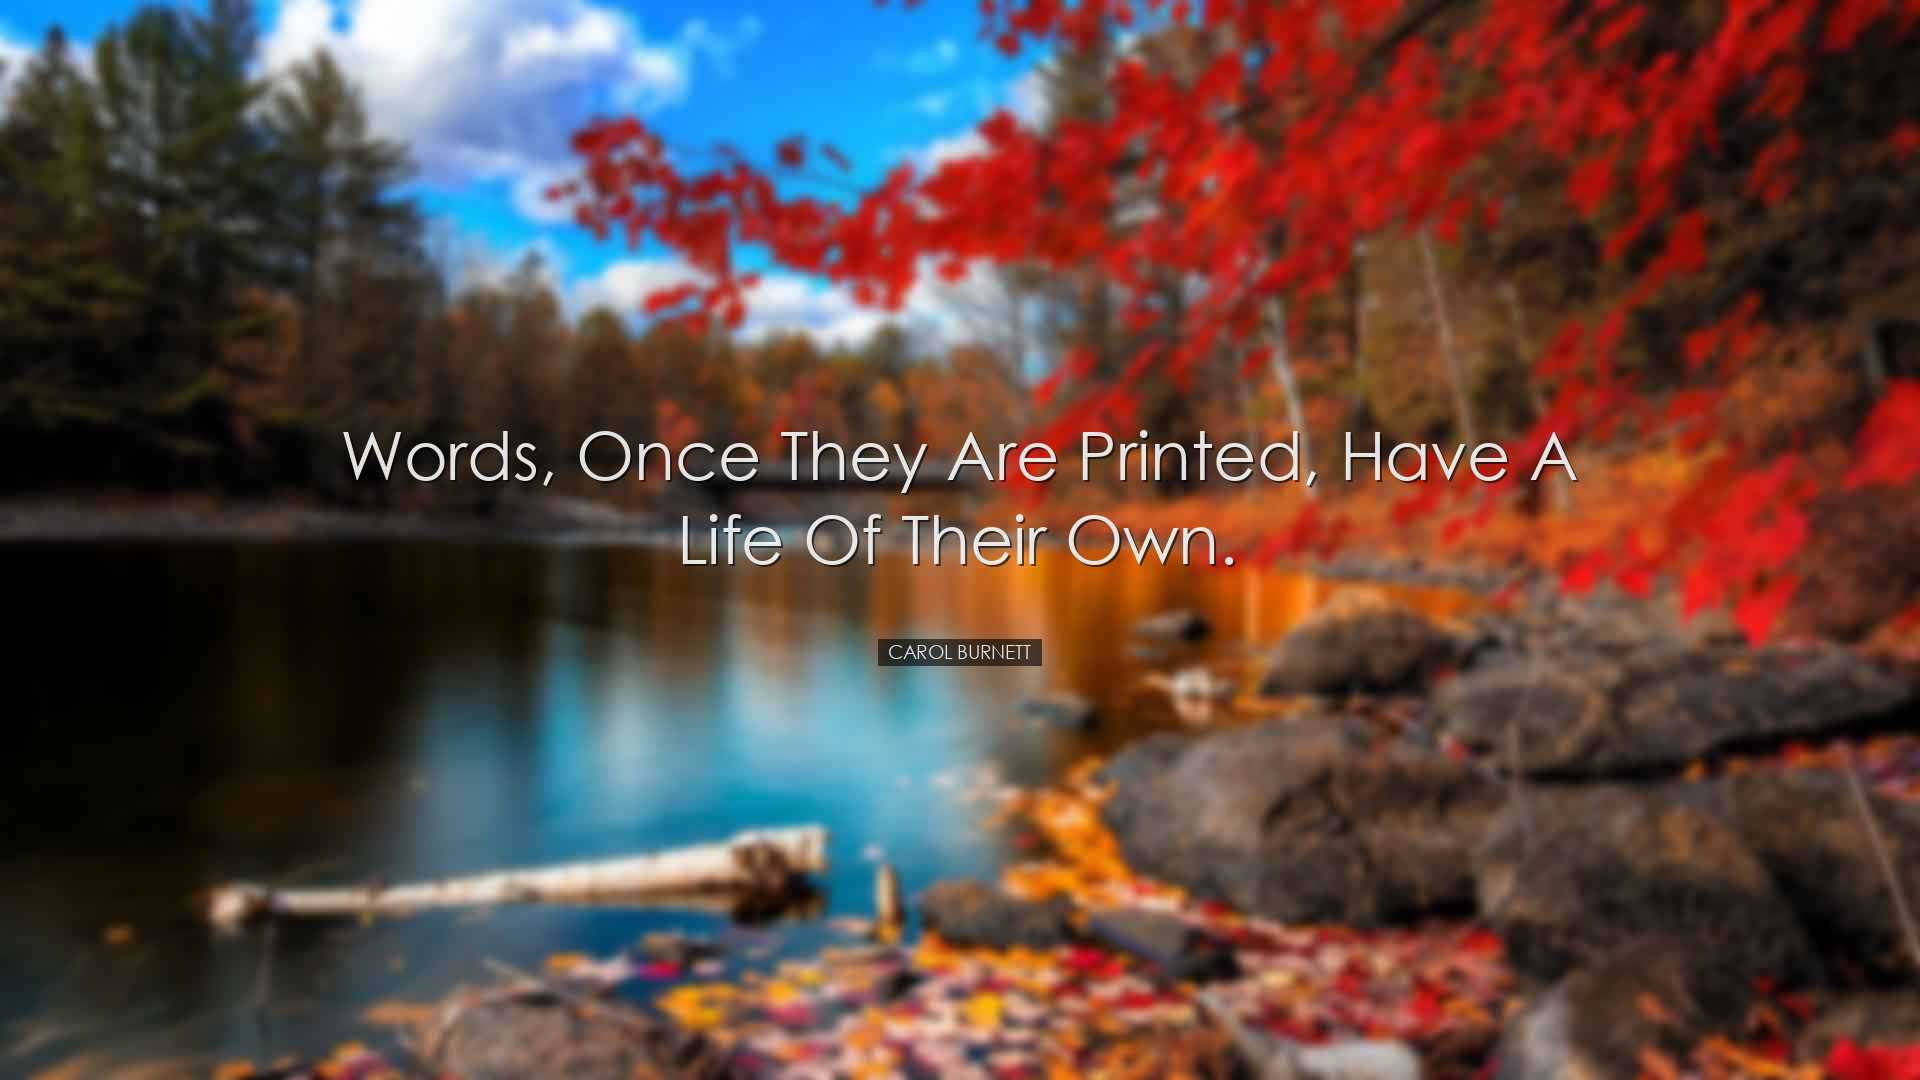 Words, once they are printed, have a life of their own. - Carol Bu